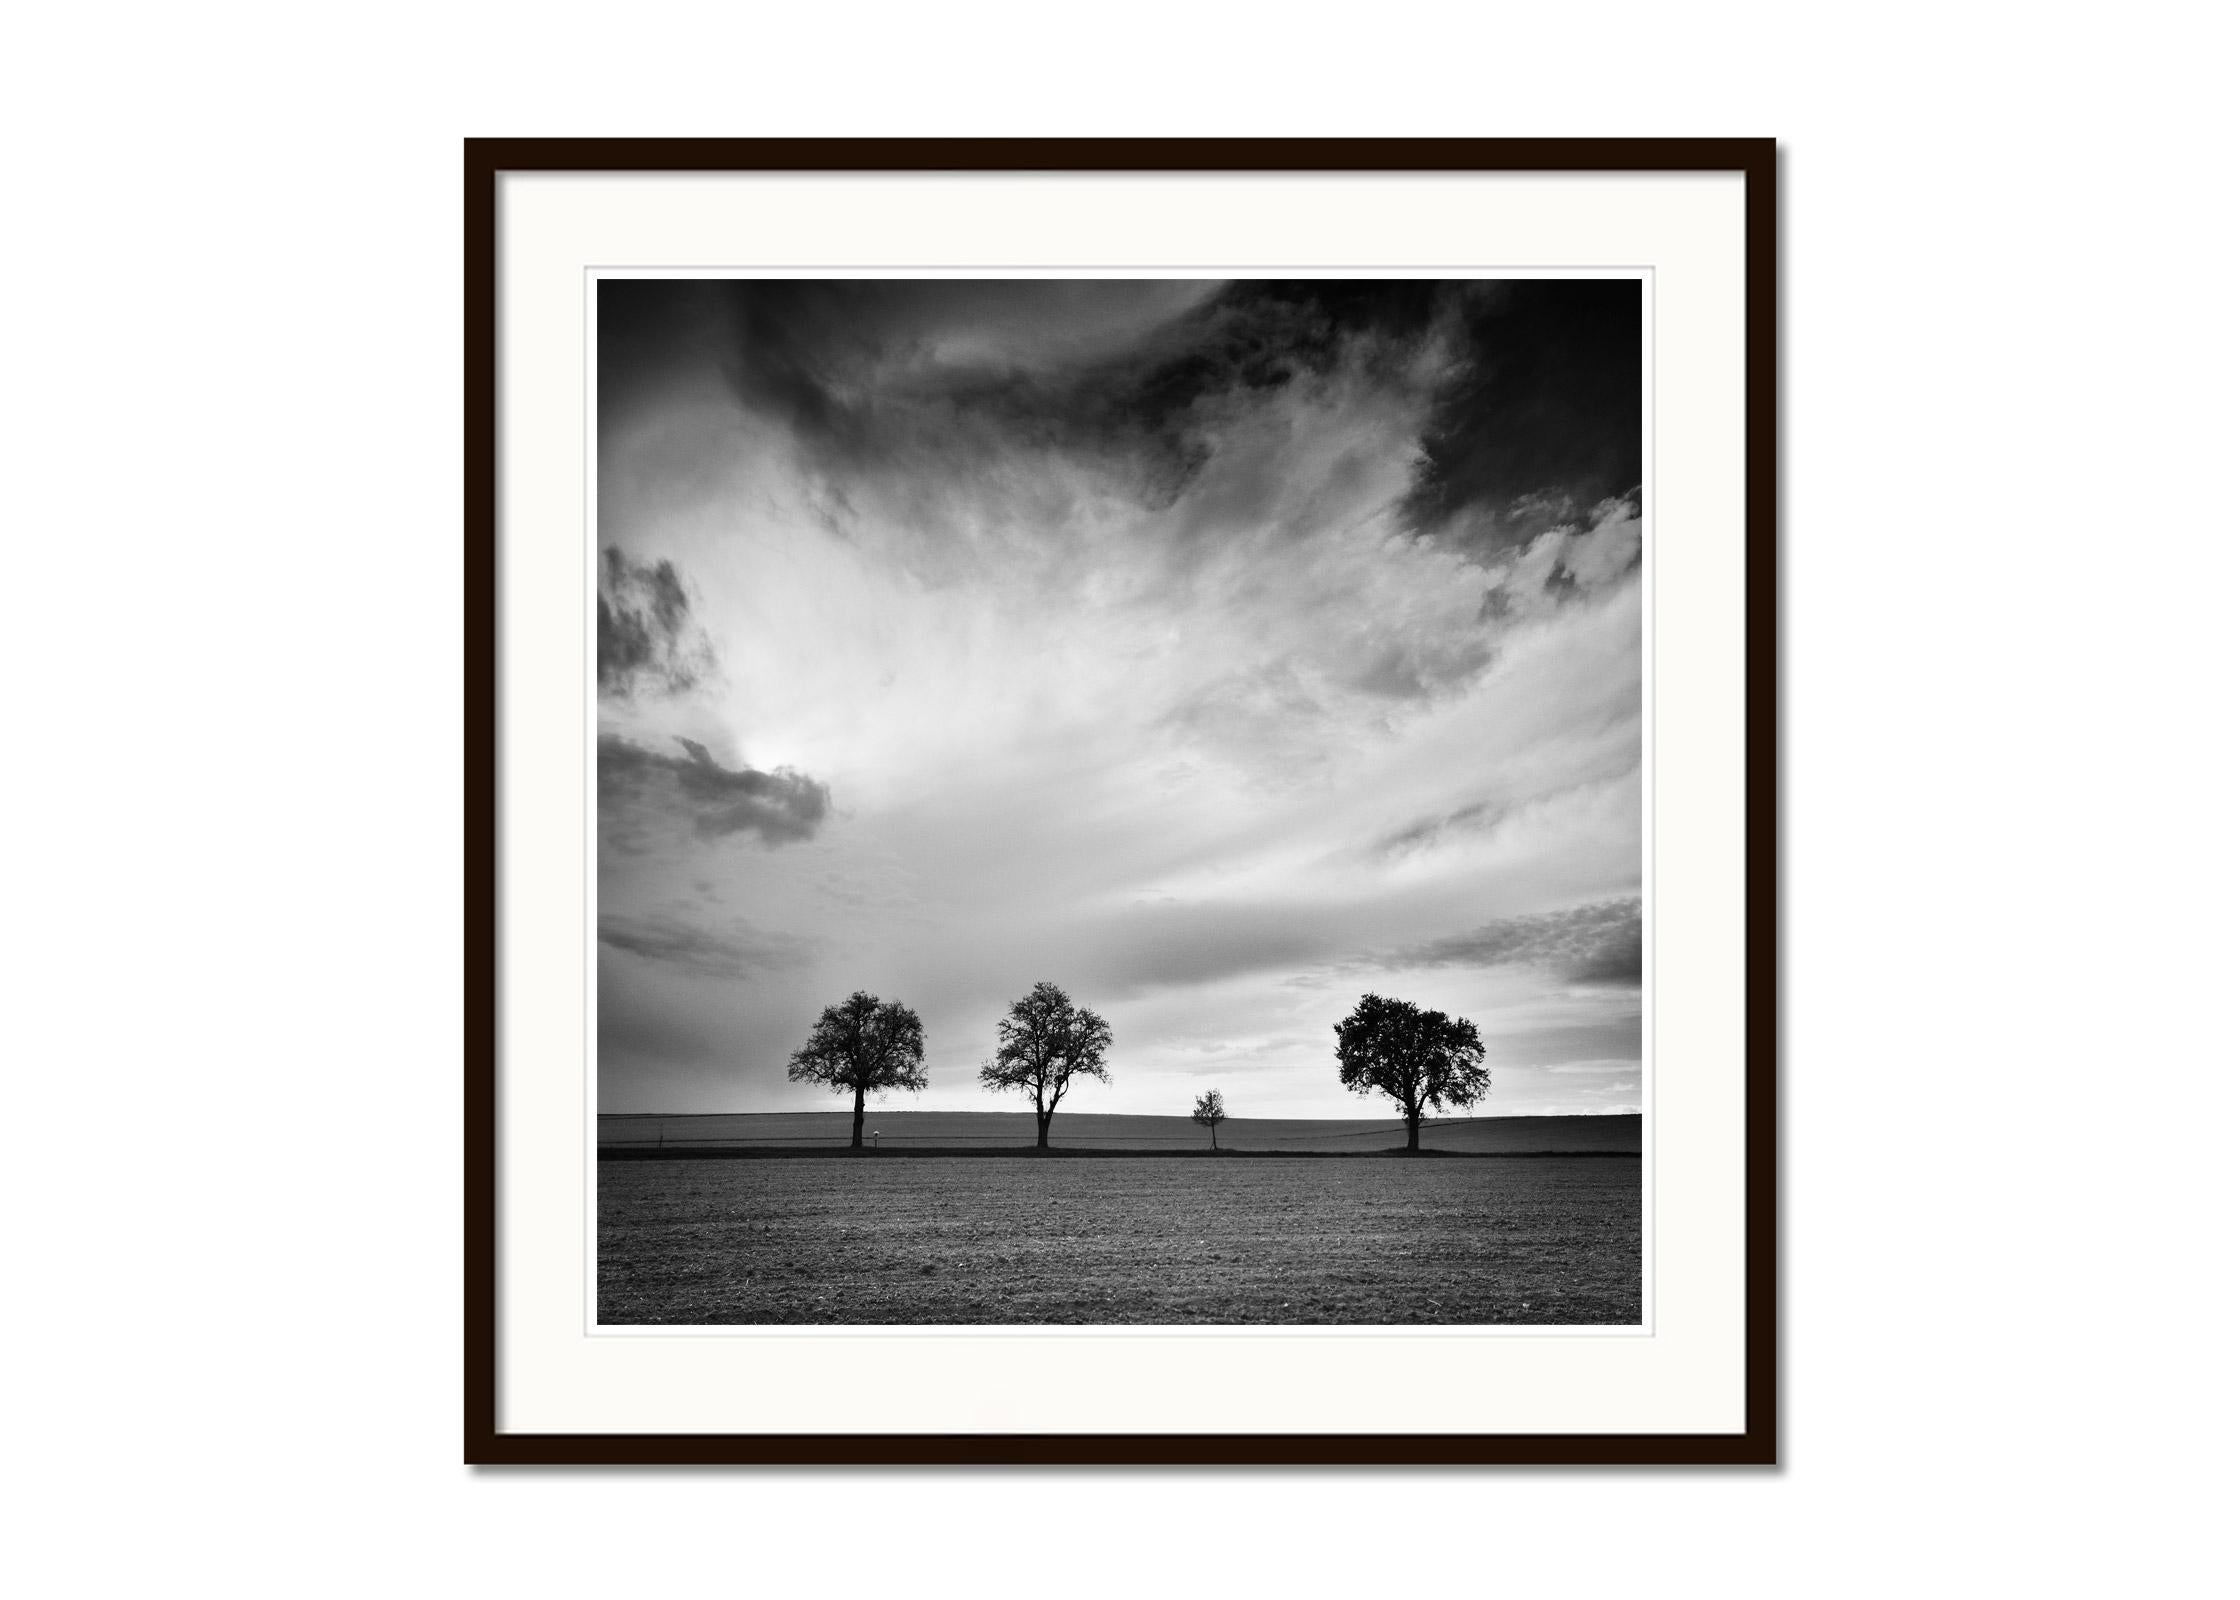 Three and a half Tree, very cloudy, storm, black and white landscape photography - Gray Landscape Photograph by Gerald Berghammer